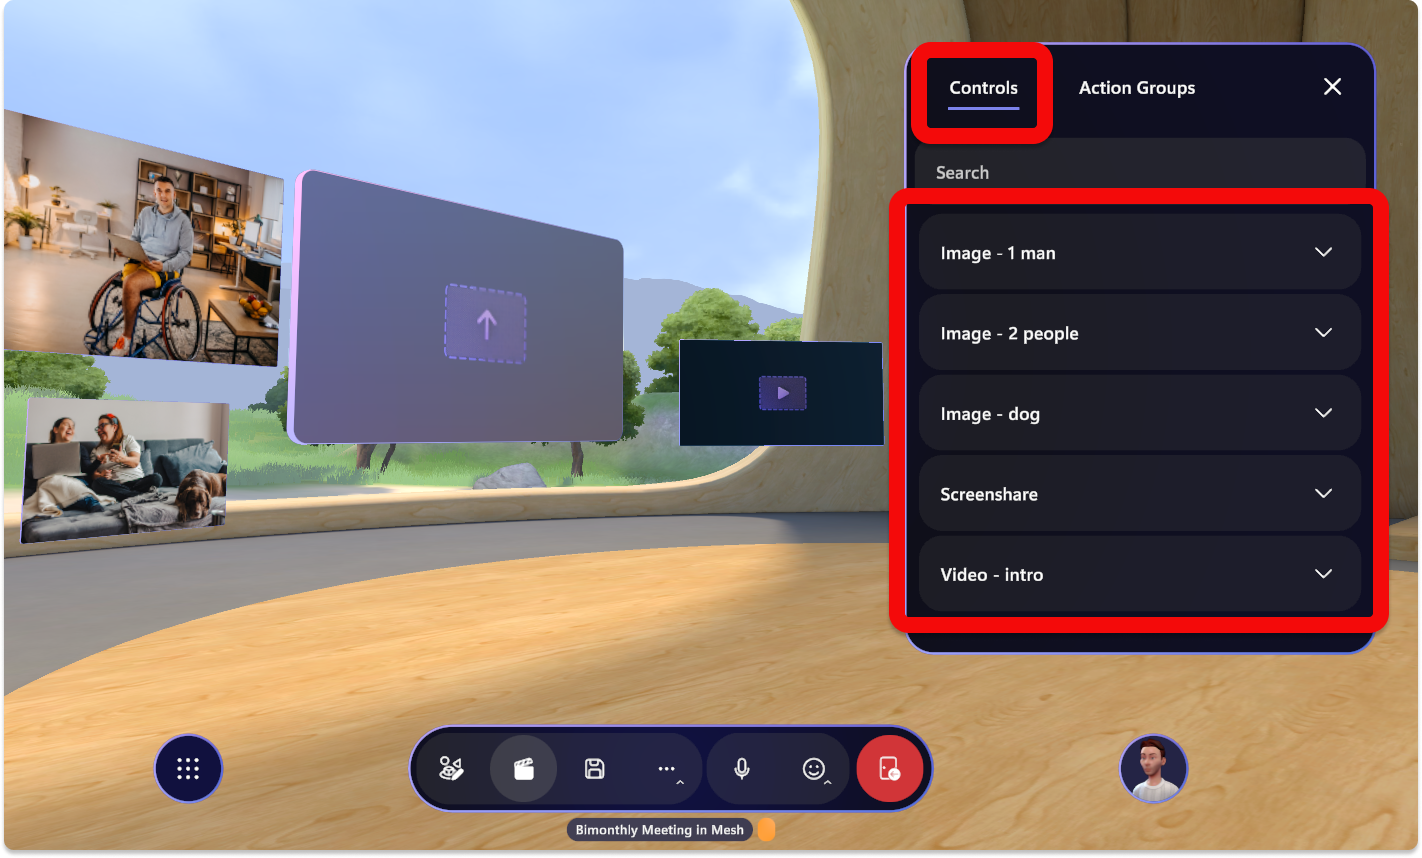 Screenshot of control panel showing the objects in an environment.